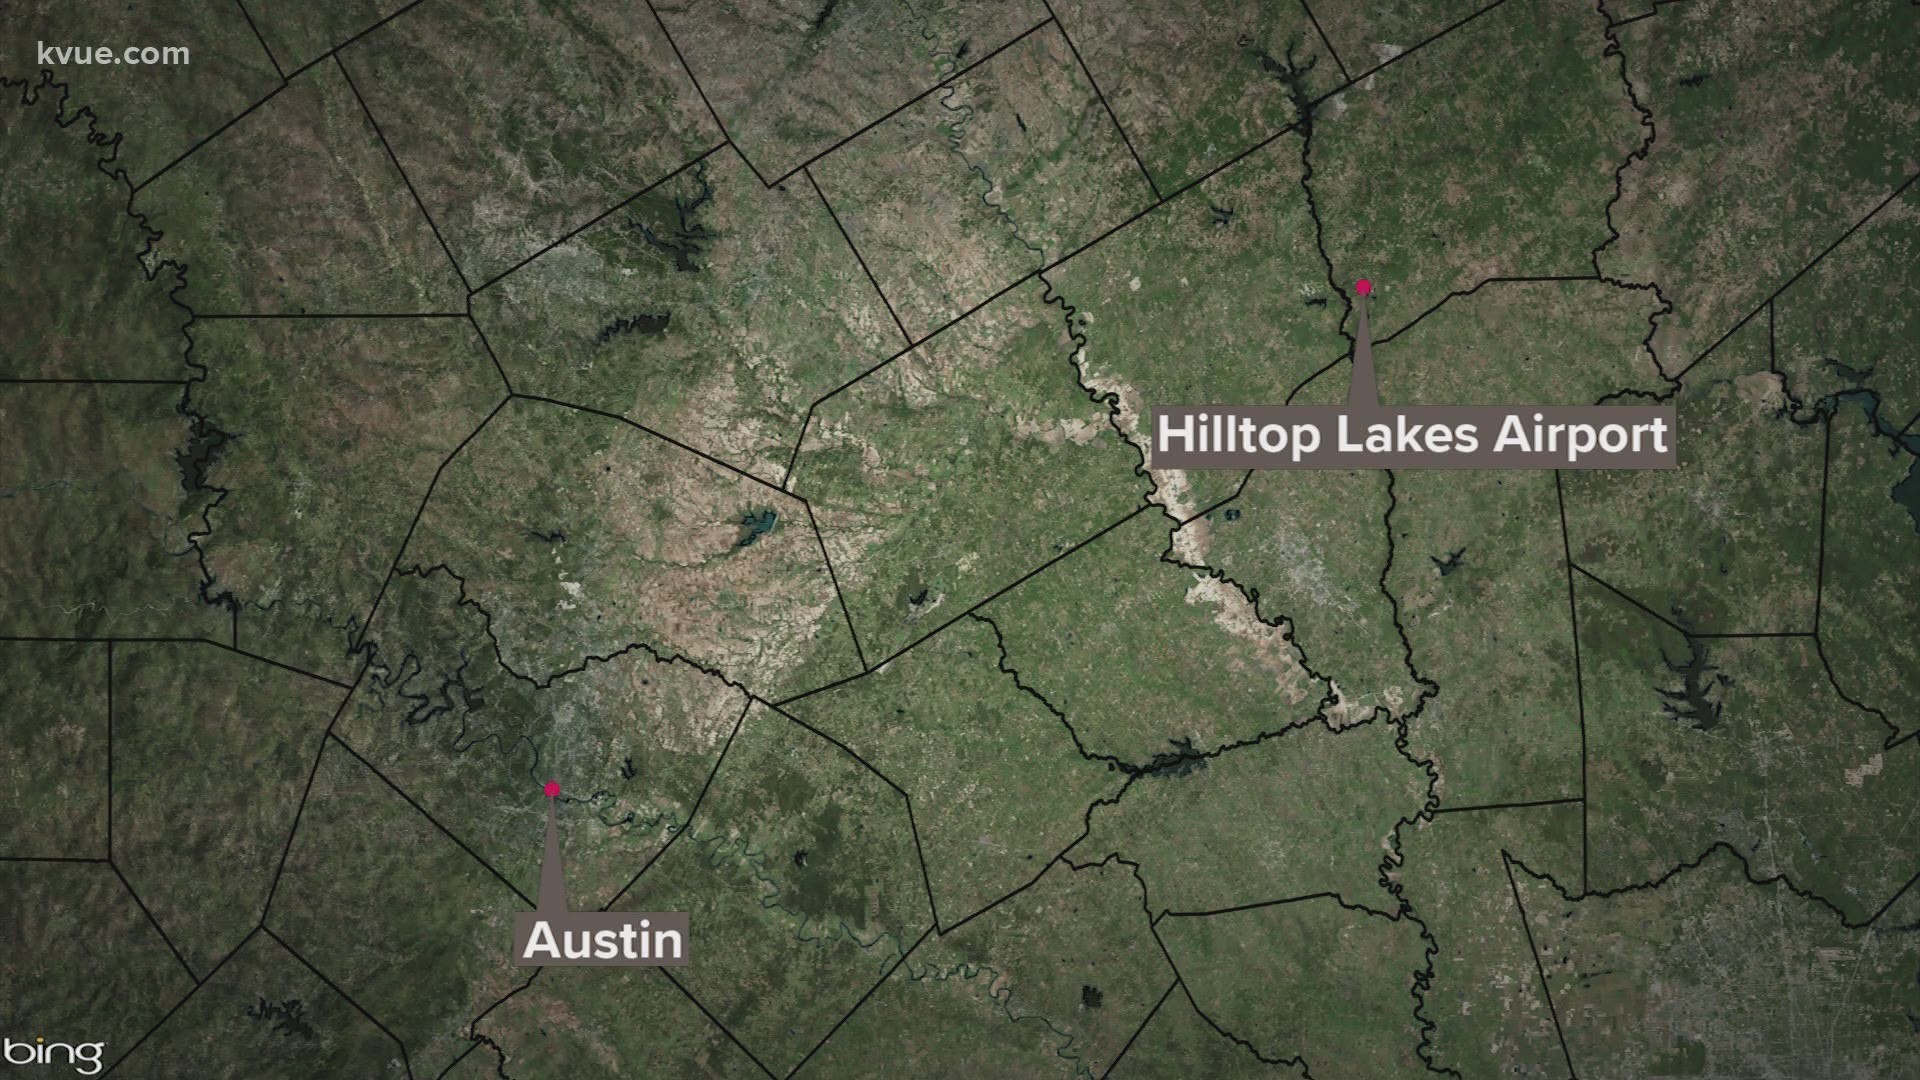 Four people have reportedly died following a small plane crash due to engine trouble while attempting to make an emergency landing Sunday in Hilltop Lakes, Texas.